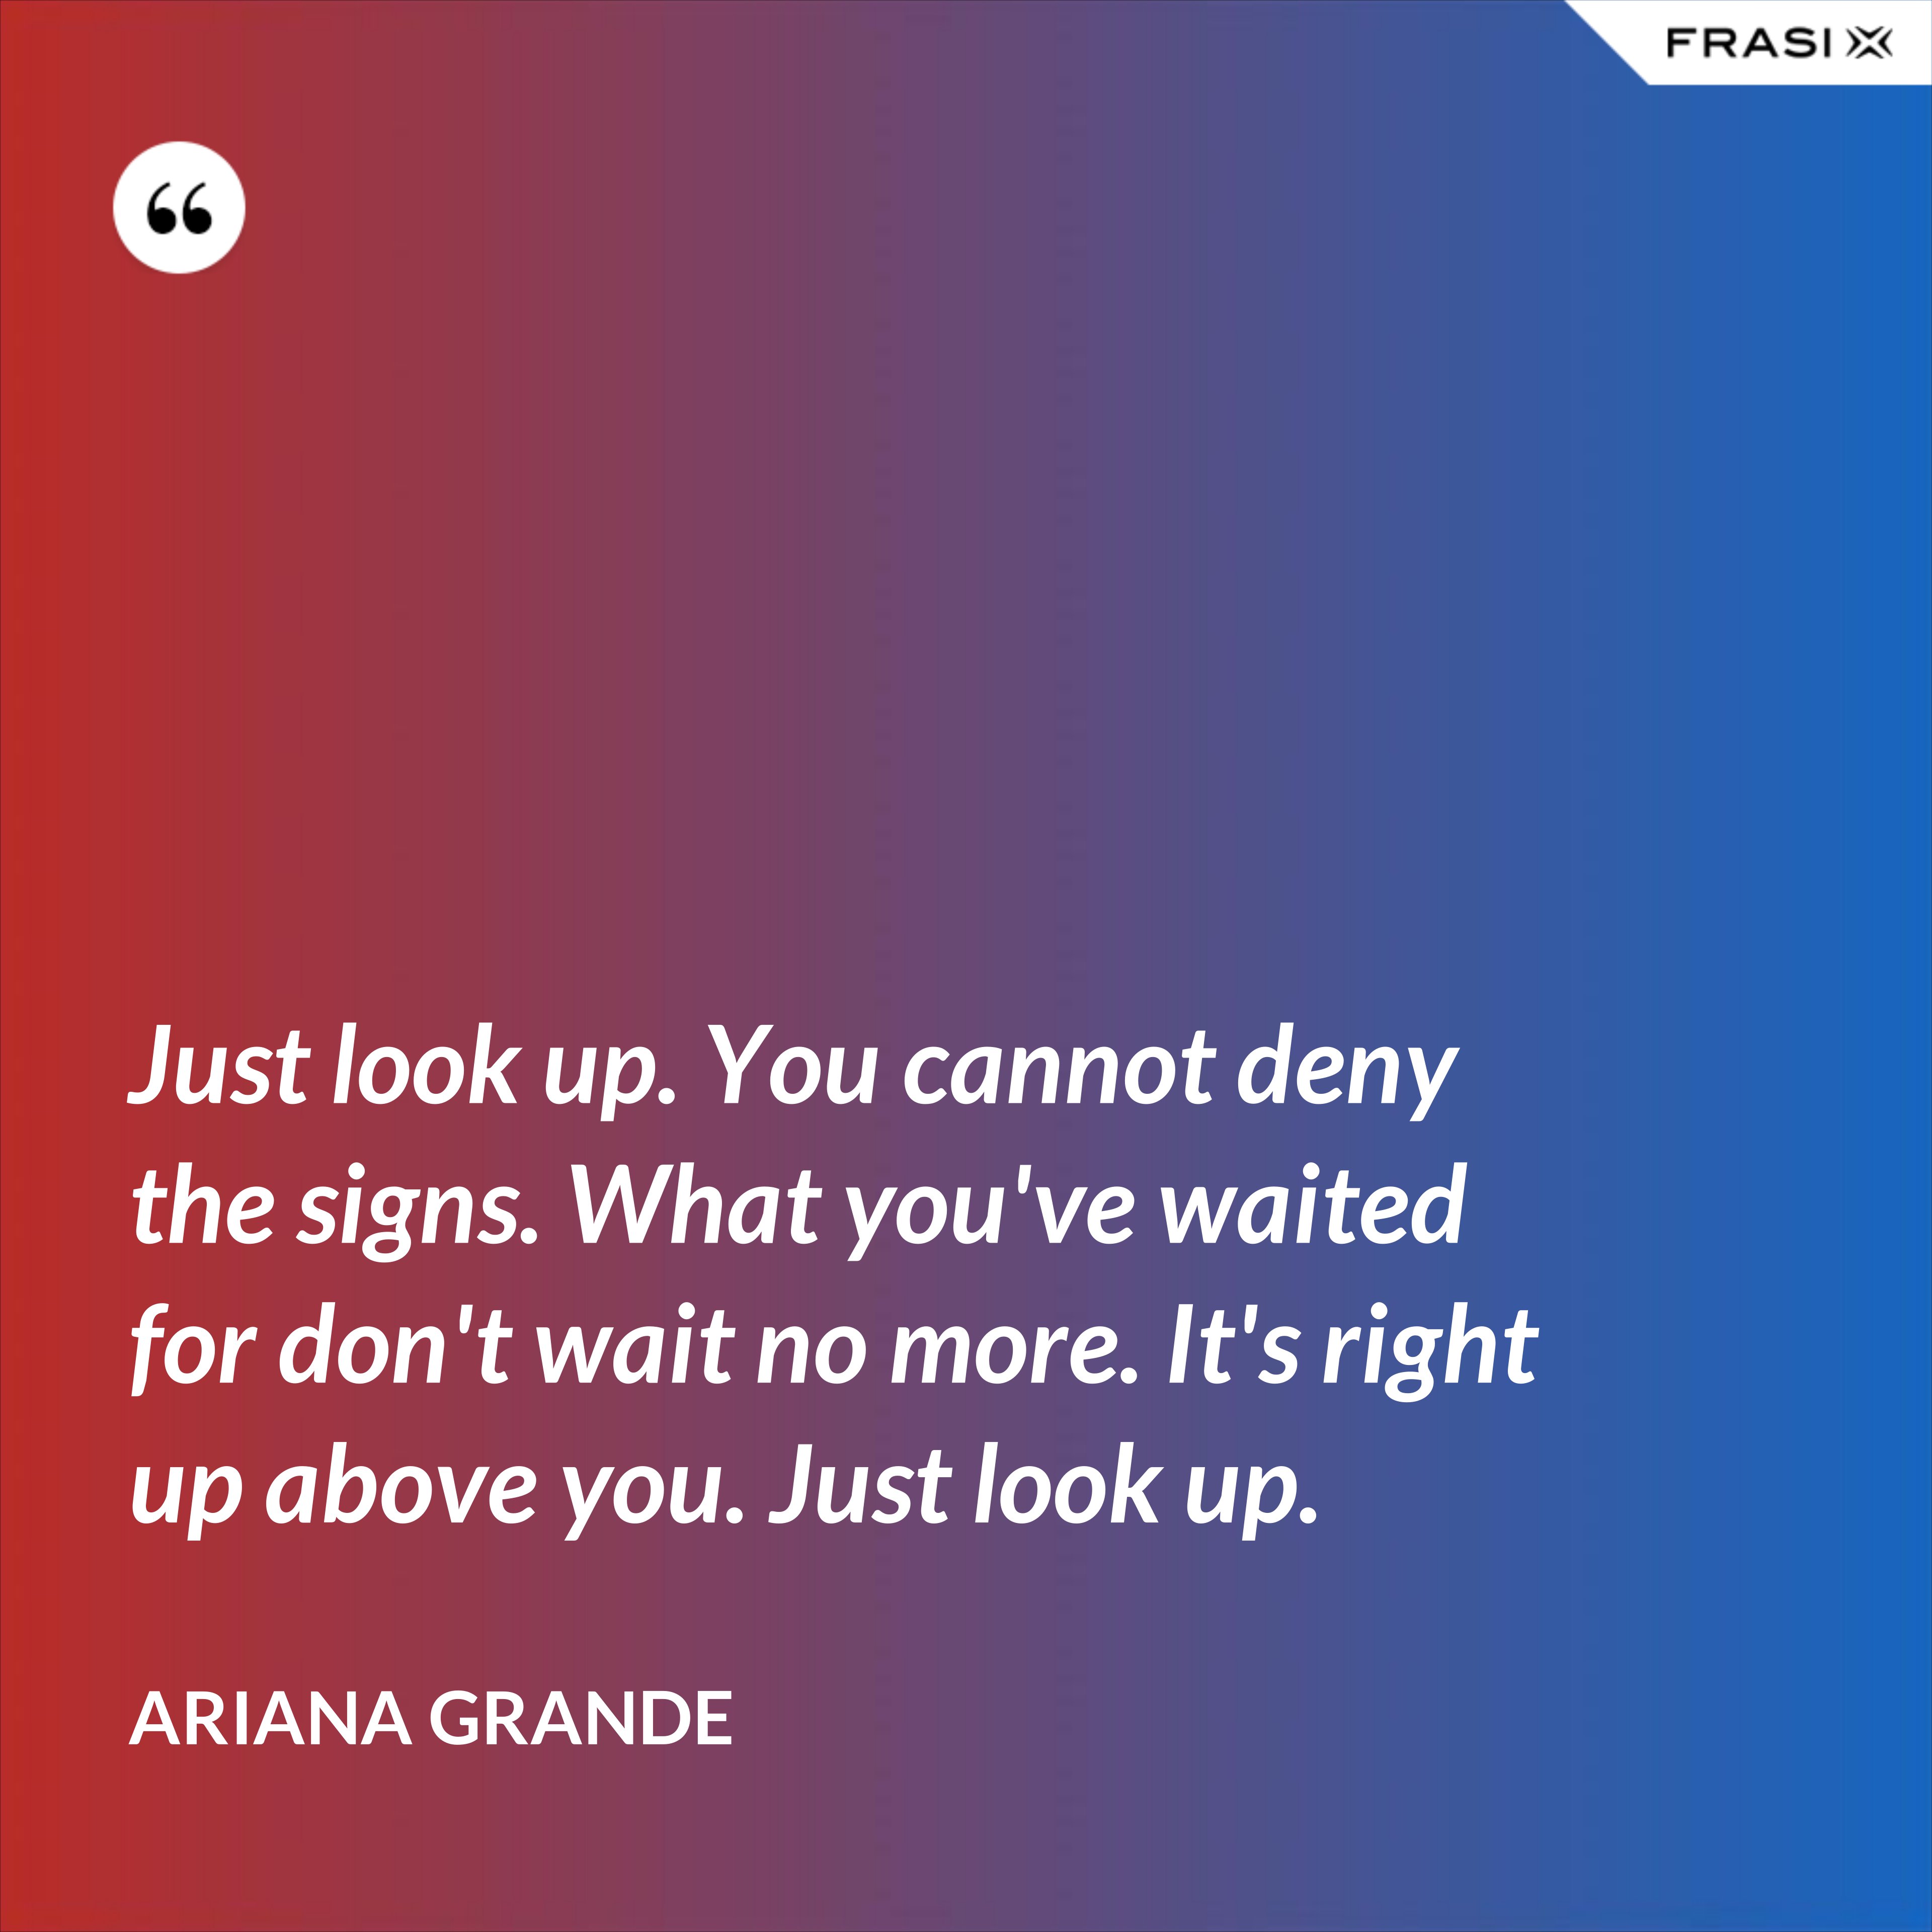 Just look up. You cannot deny the signs. What you've waited for don't wait no more. It's right up above you. Just look up. - Ariana Grande